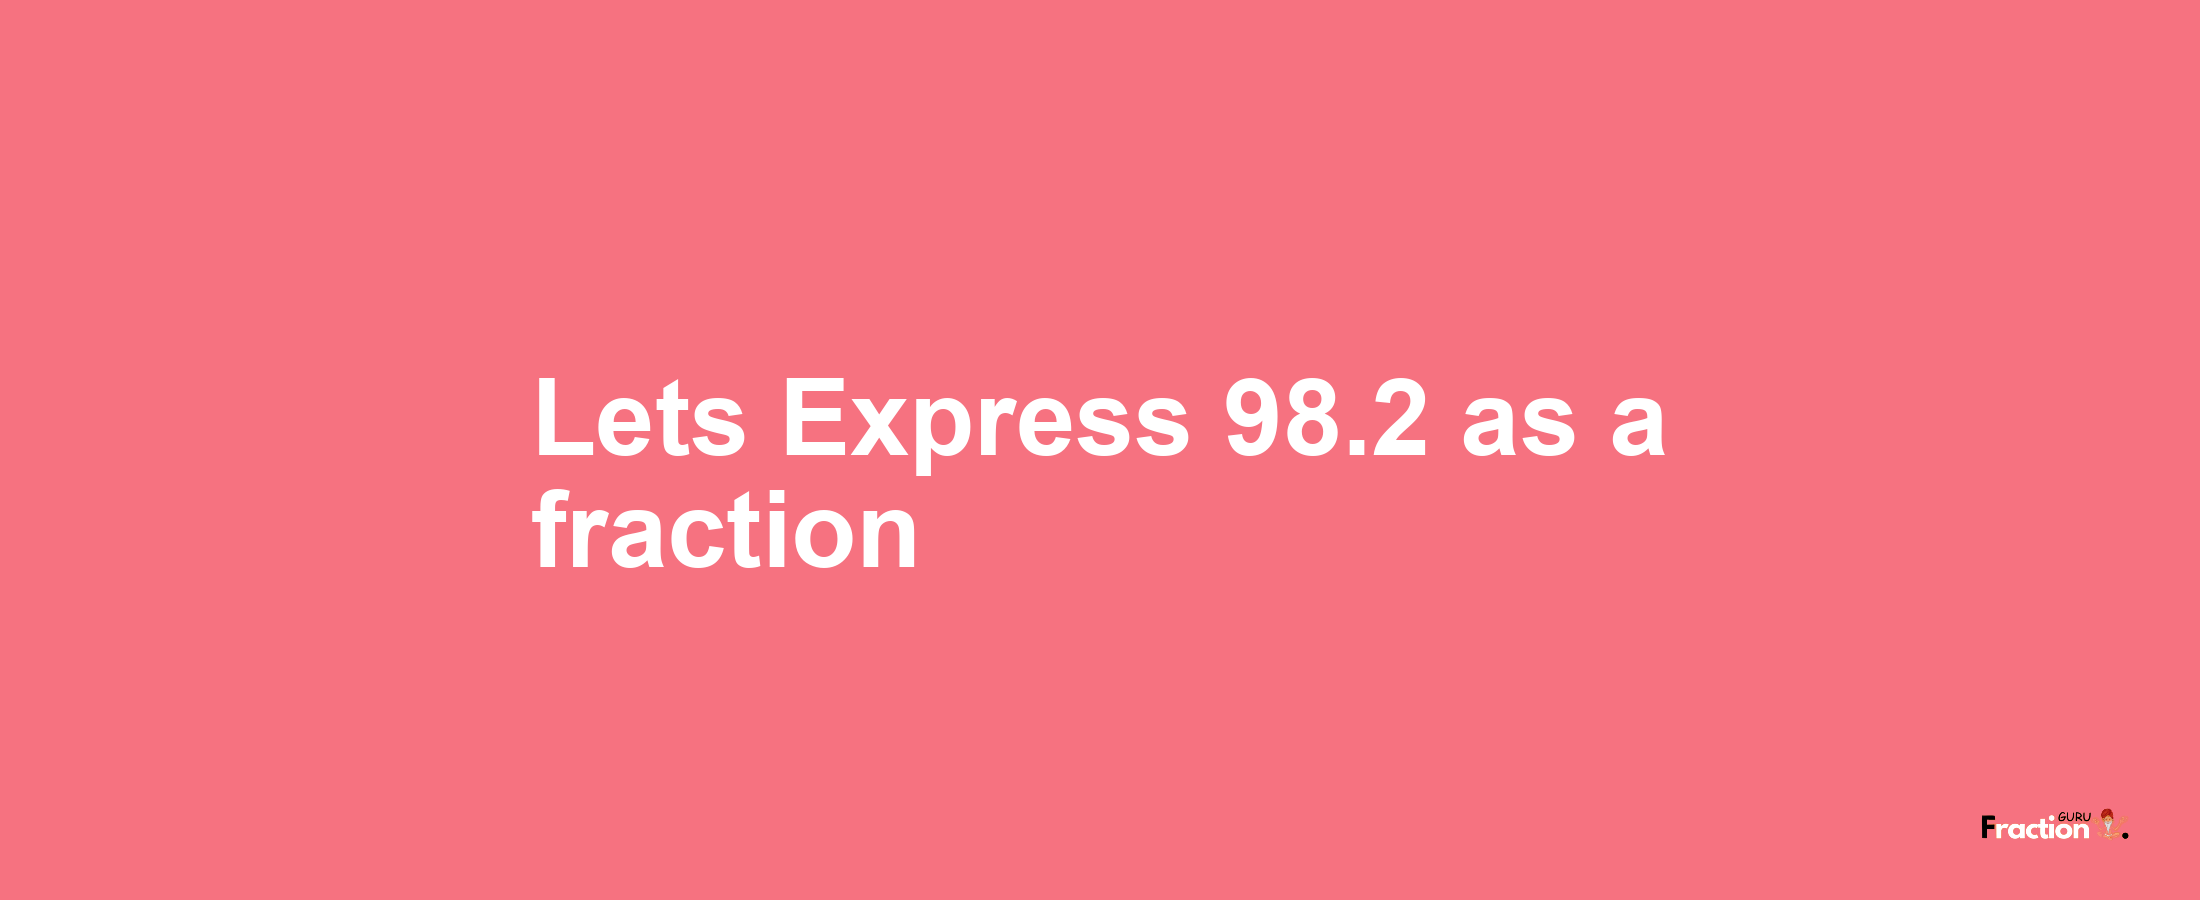 Lets Express 98.2 as afraction